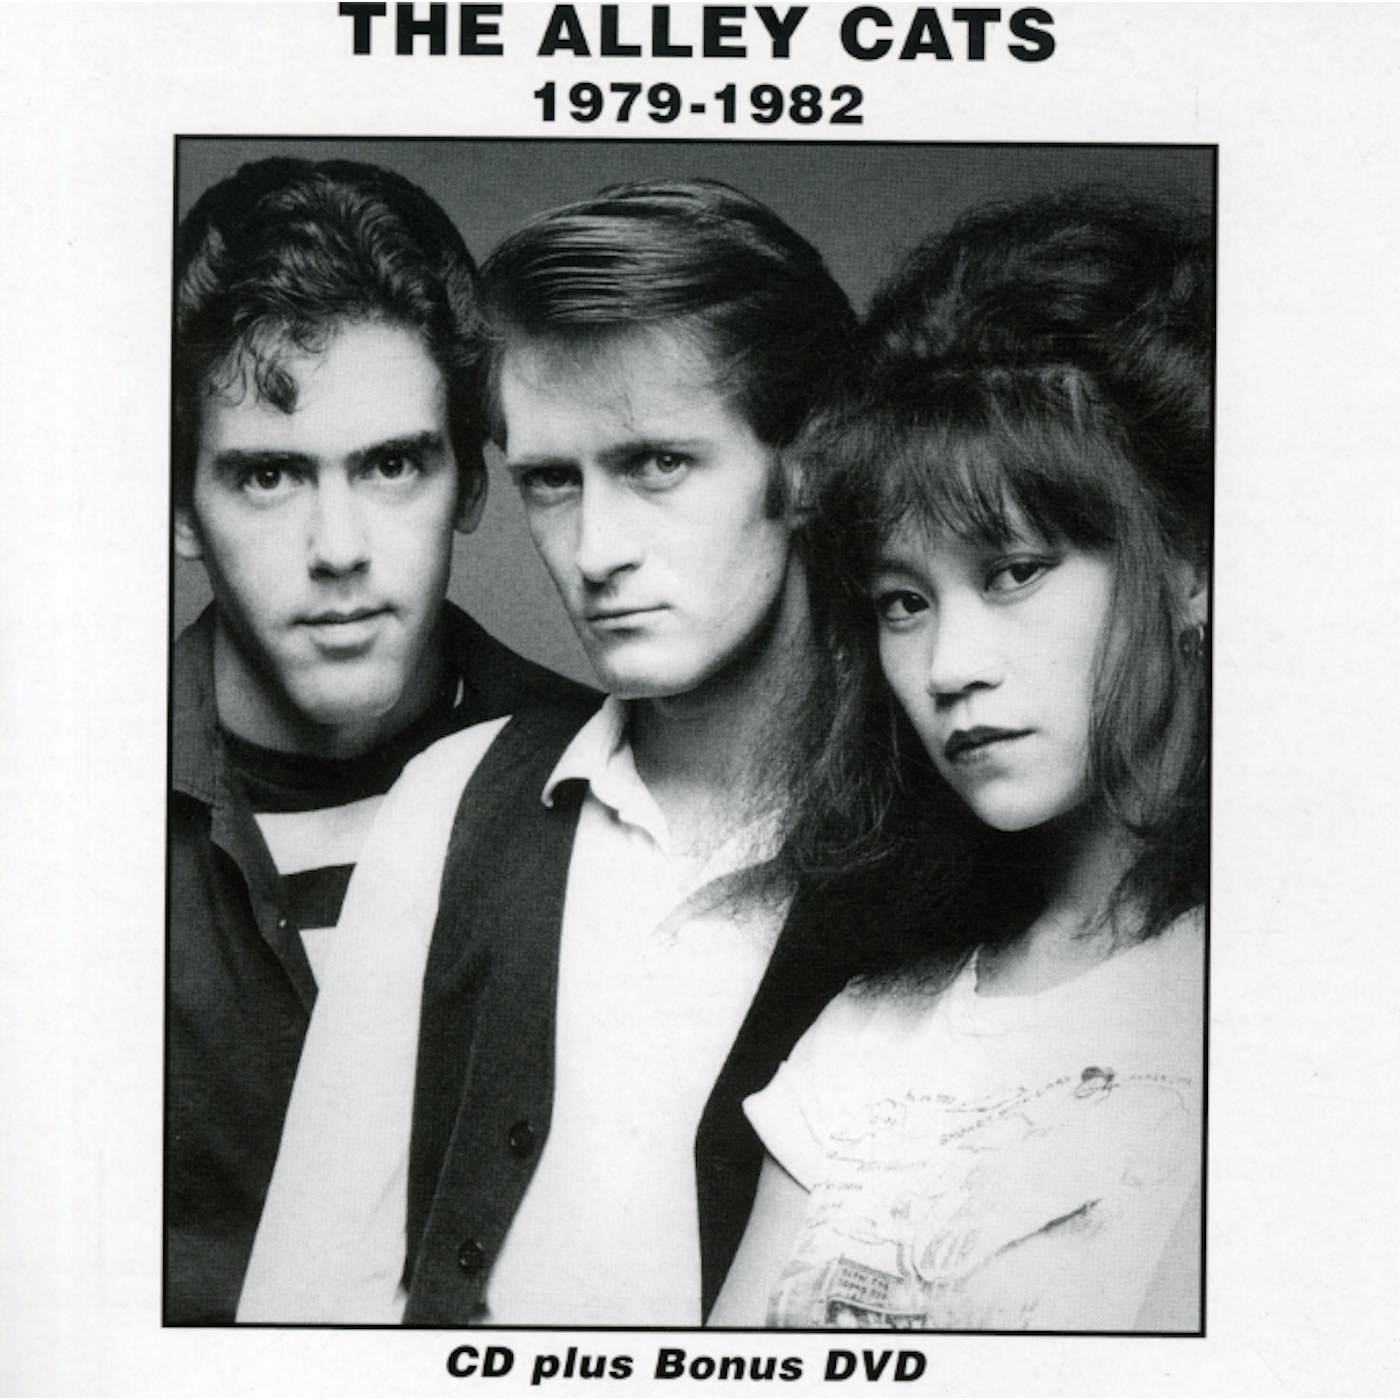 The Alley Cats 1979-1982 CD